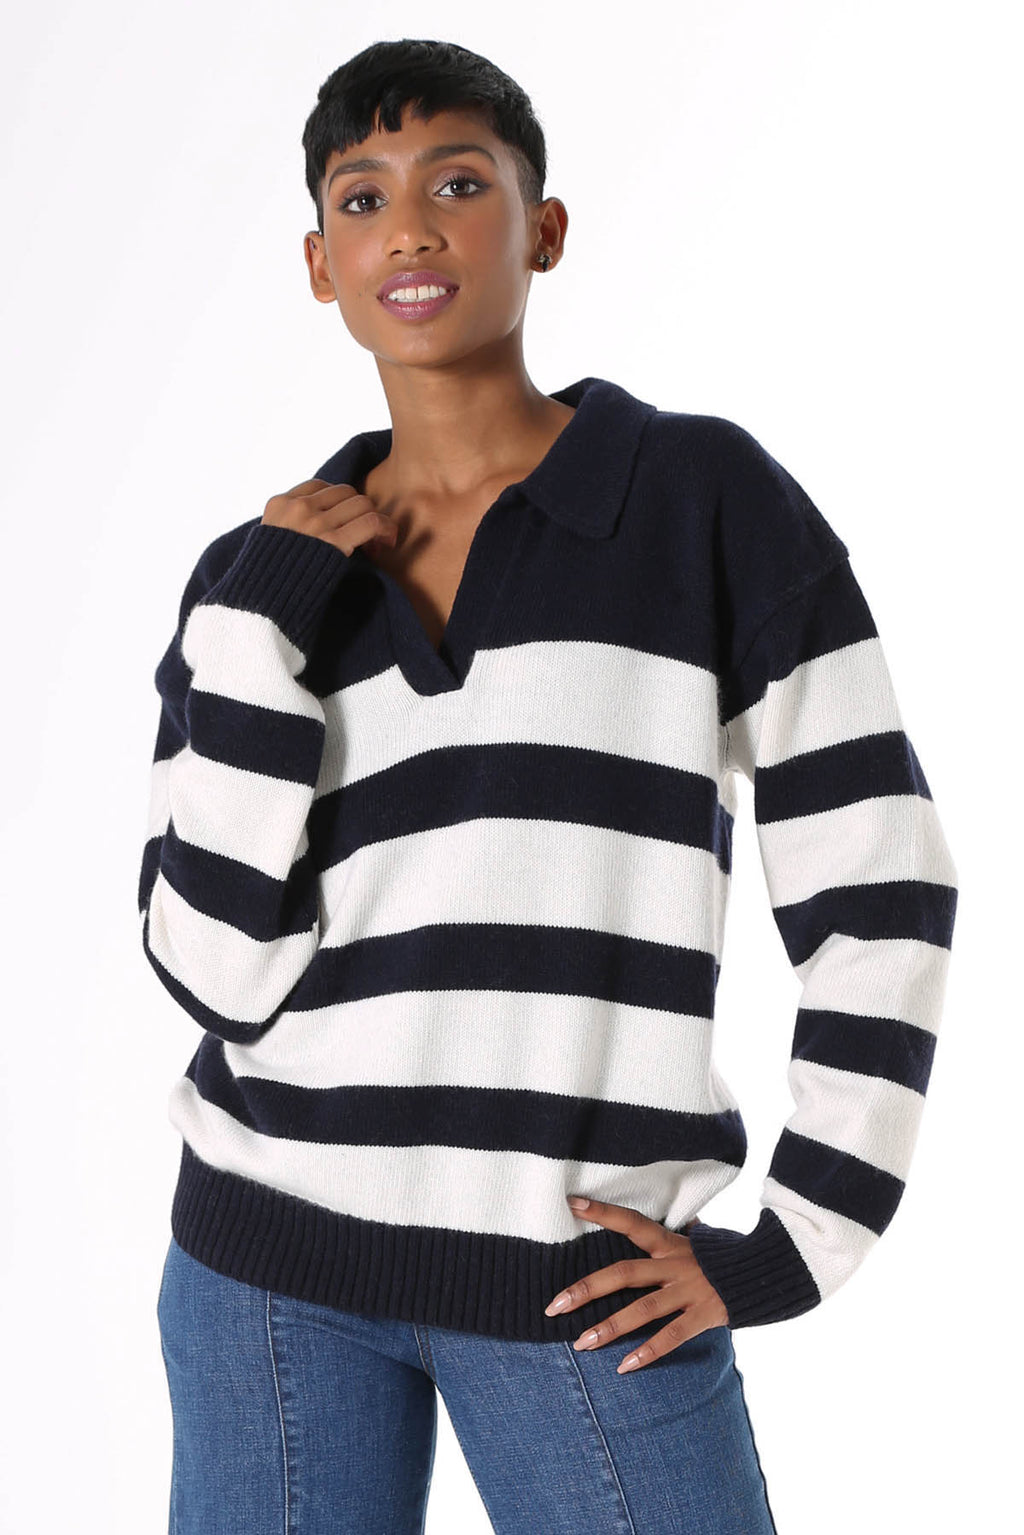 Olga de Polga Coota Long Striped Sweater. Blending the relaxed fit of a polo sweater with the luxury of cashmere, this is the perfect weekend knit. Long length that falls below the hip, relaxed fit, with an open collar, v-neck and dropped shoulder. Patterned with wide and narrow horizontal navy stripes. 